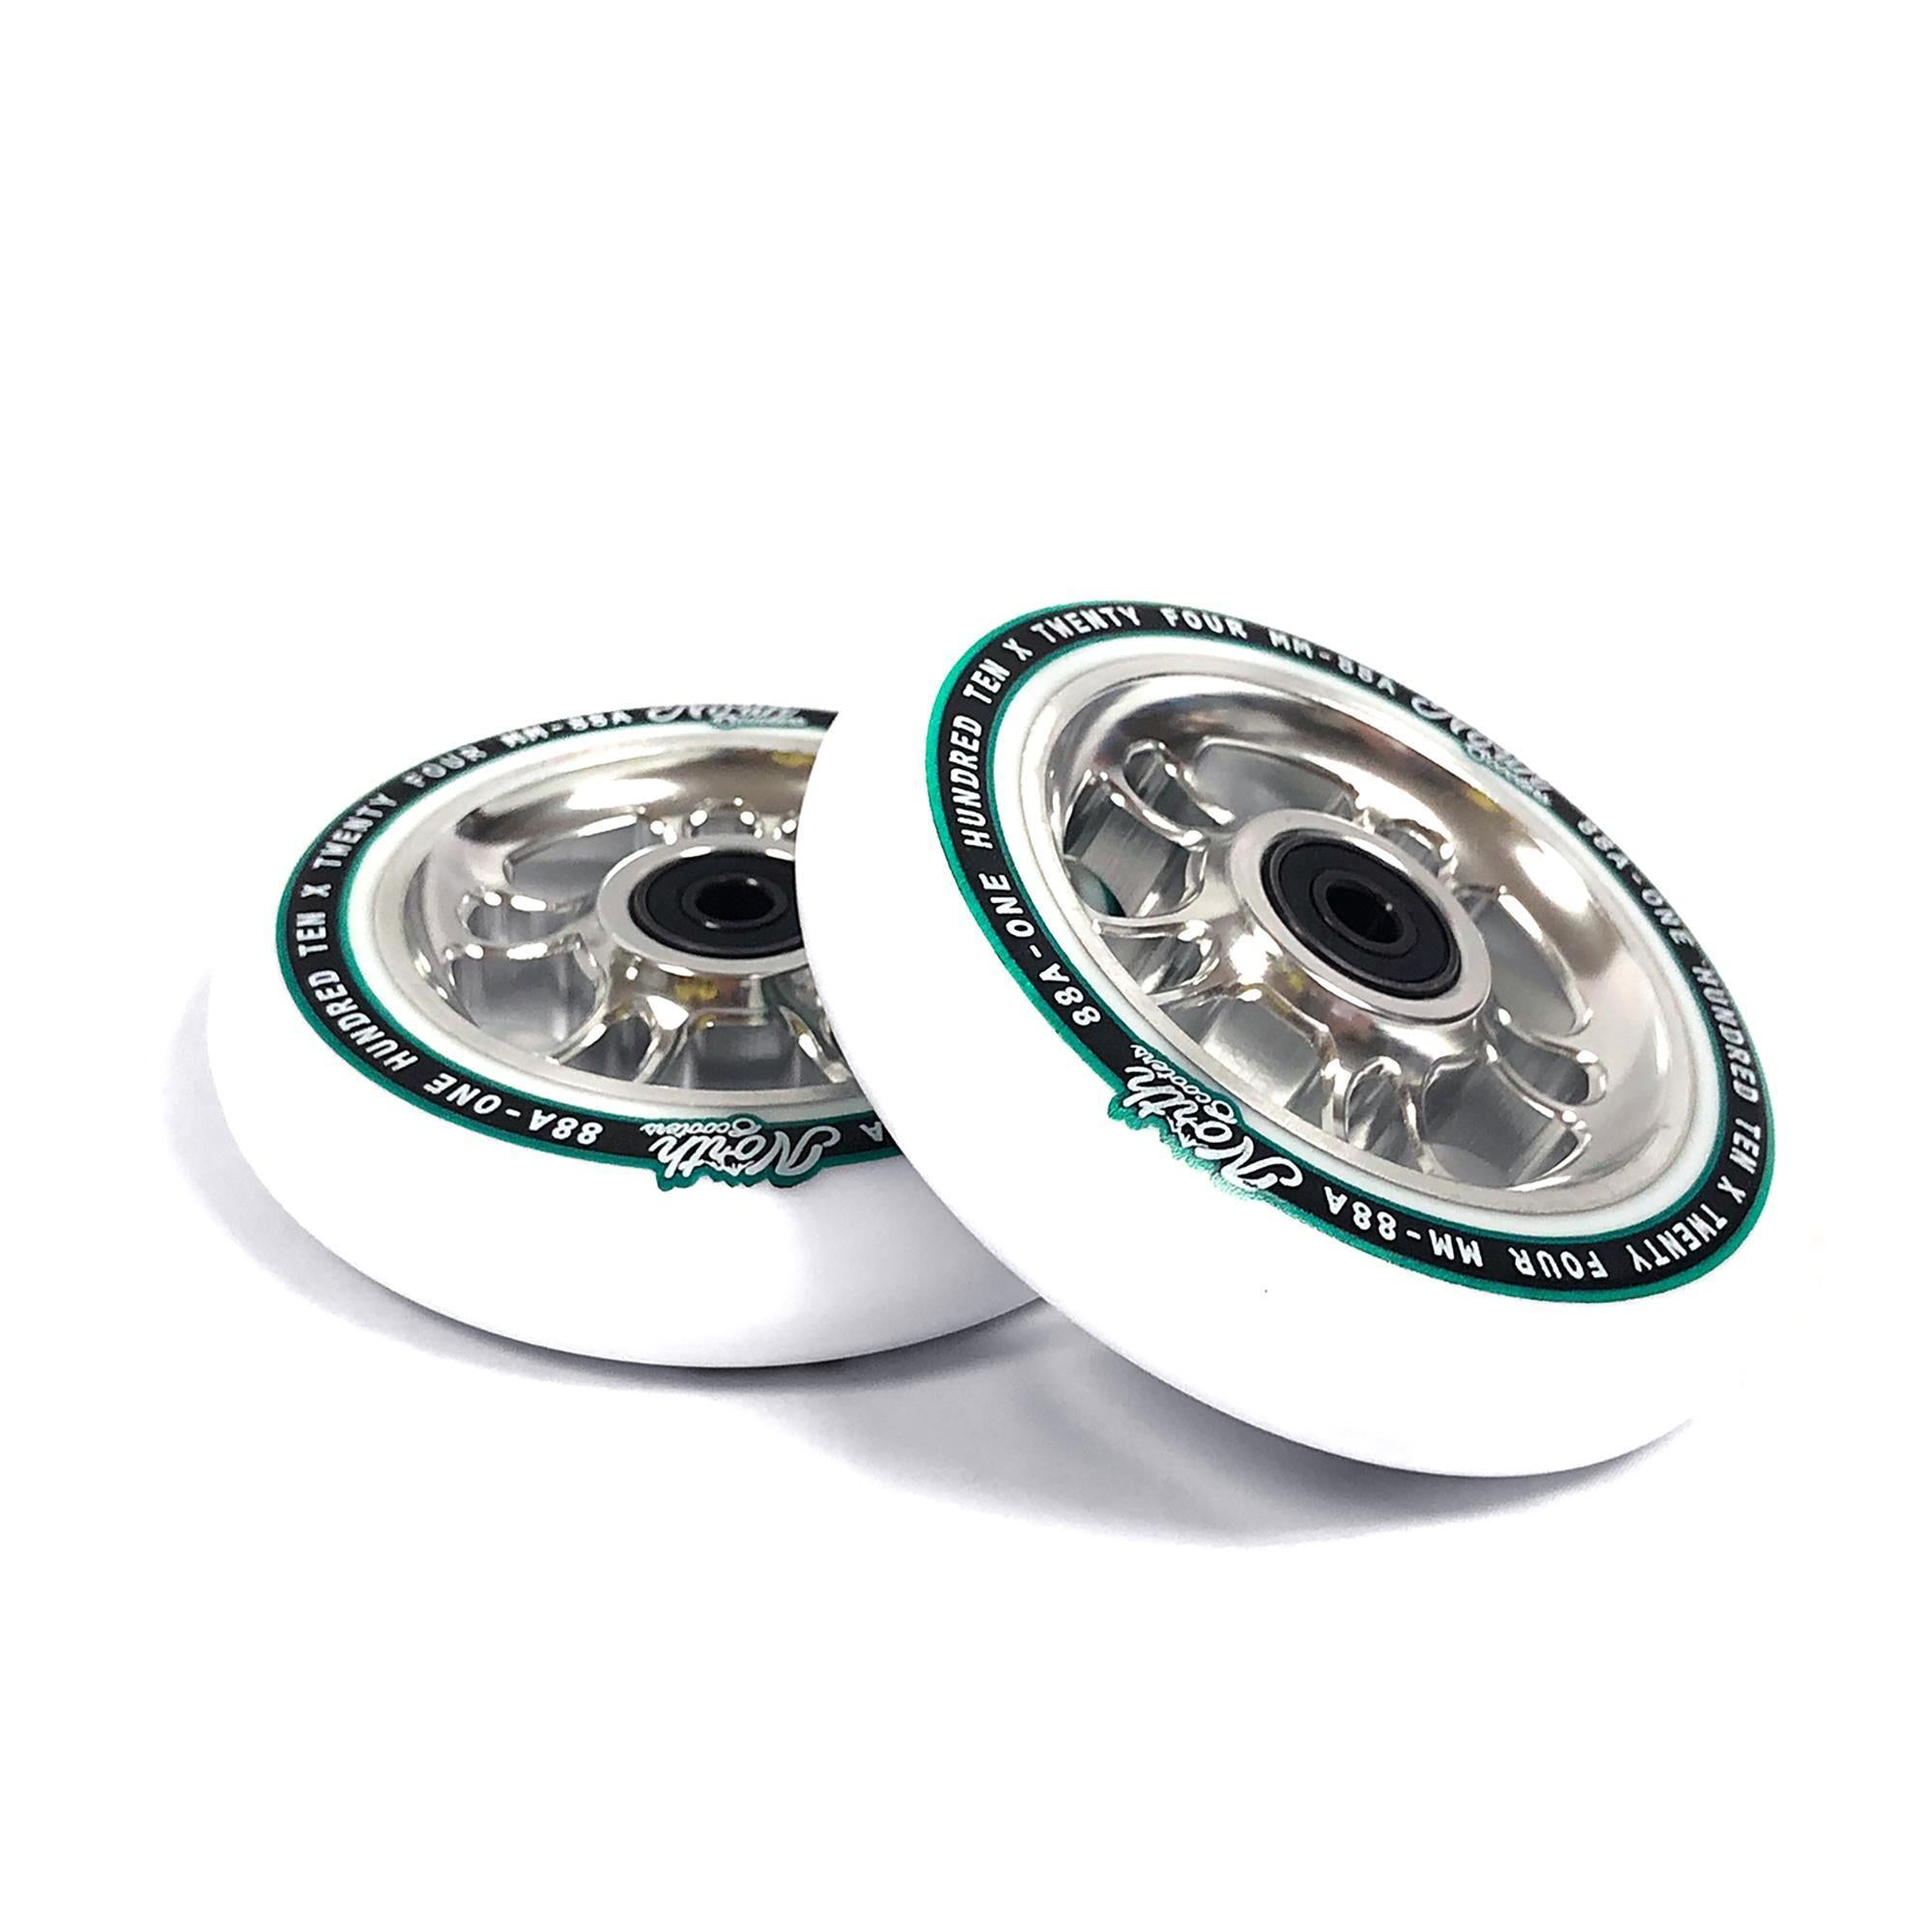 North Scooters Wagon 110mm White PU (PAIR) - Scooter Wheels Silver